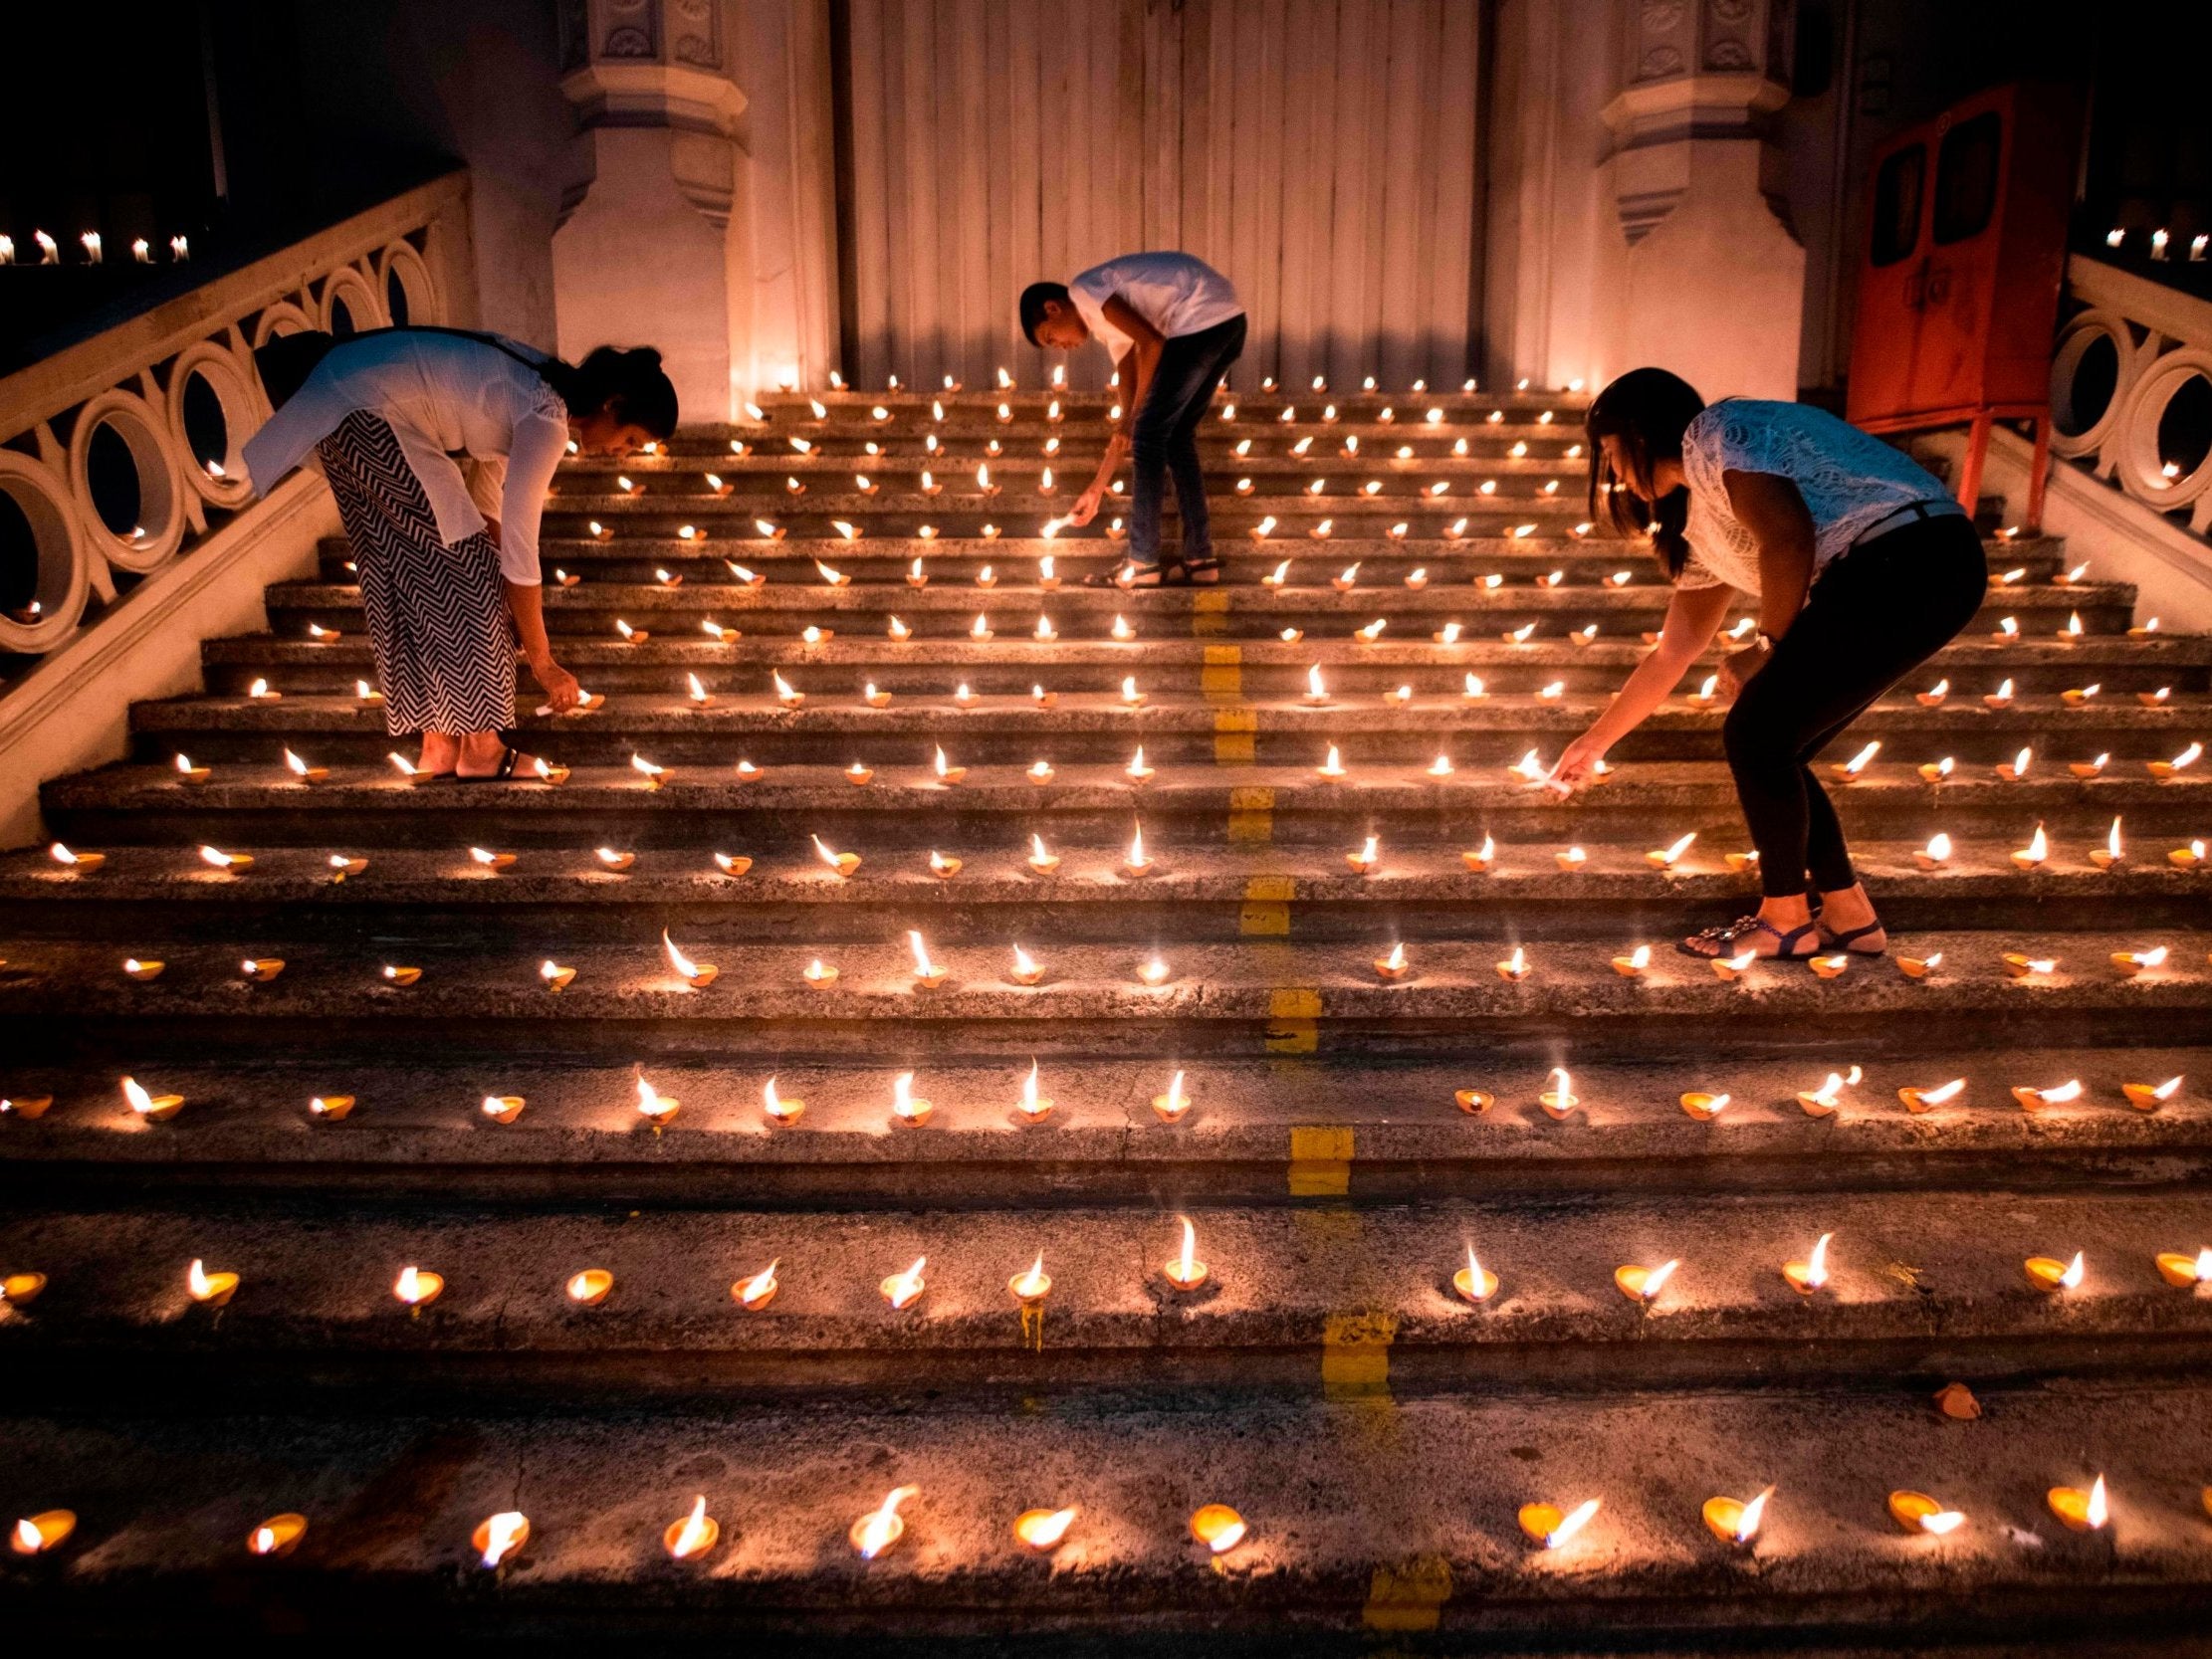 A vigil in memory of victims of the Easter terror attacks in Colombo